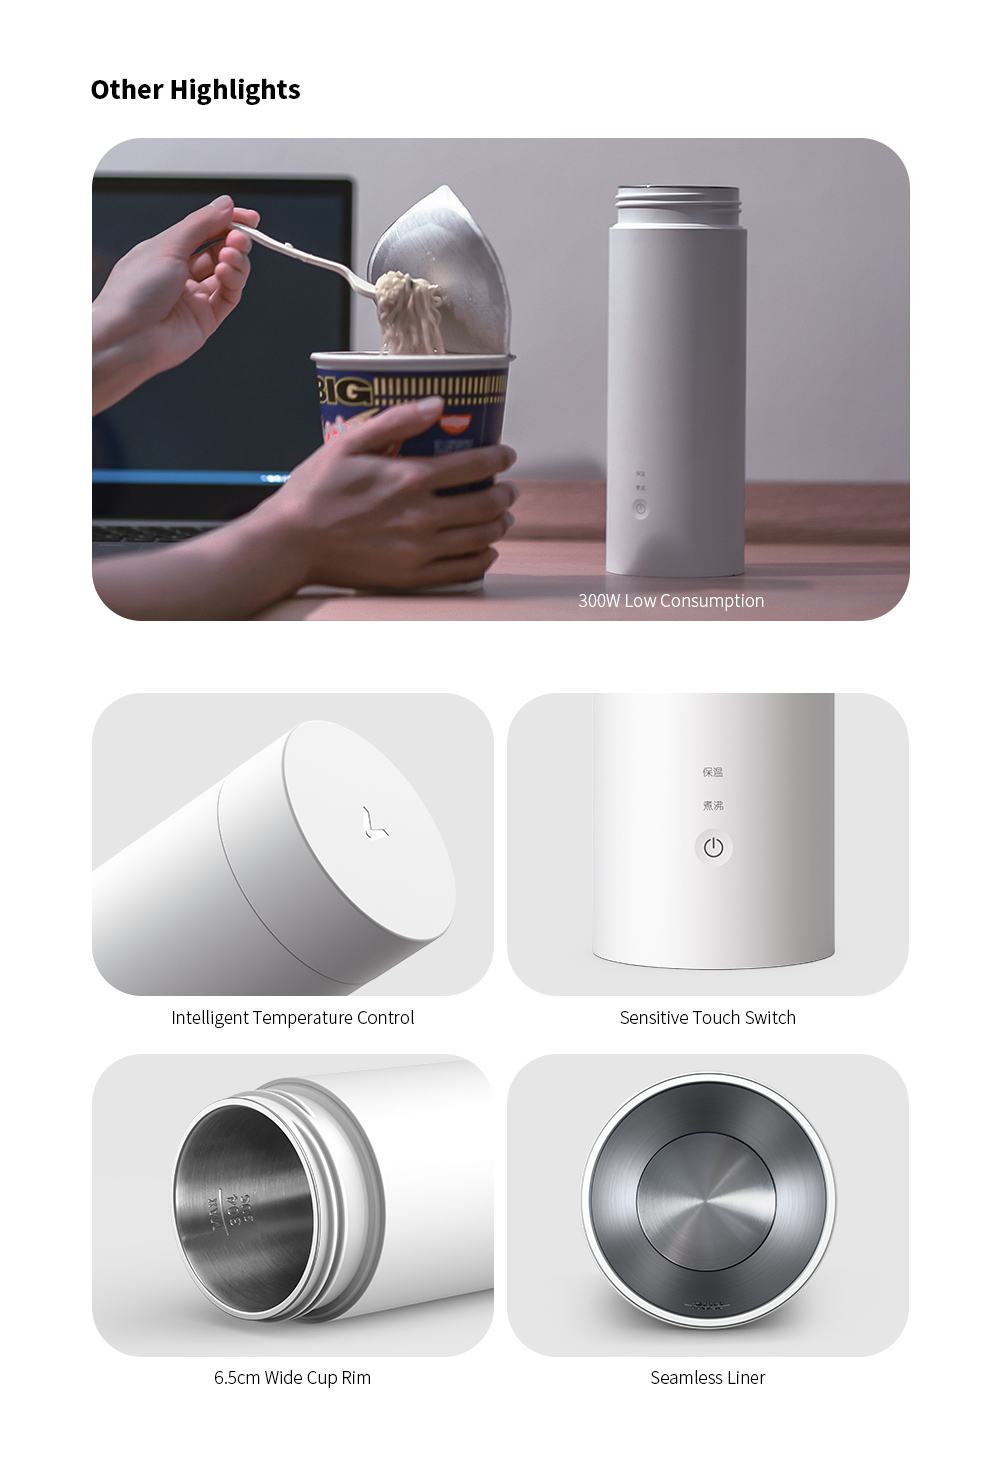 VIOMI Portable Travel Electric Heating Vacuum Cup from Xiaomi youpin